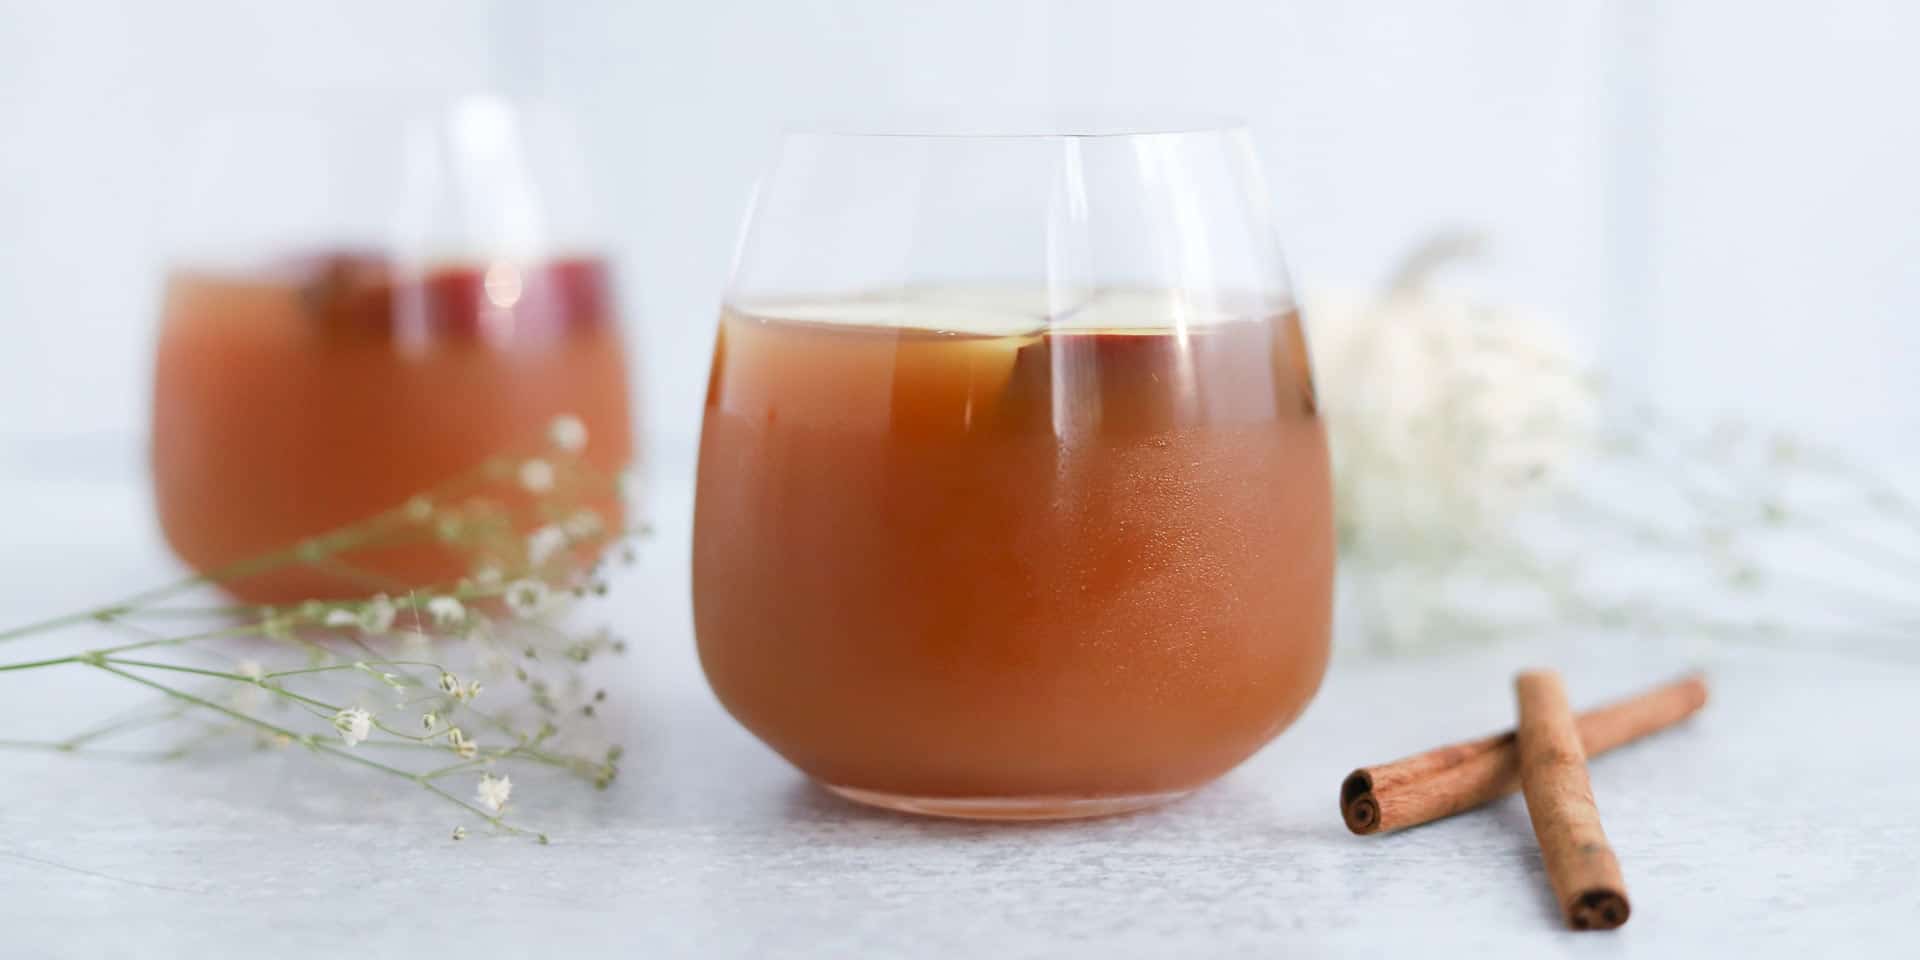 Two glasses of iced tea with a hint of cinnamon, accompanied by delicate white flowers, offering a refreshing moment on a serene backdrop infused with metaphysical energy.